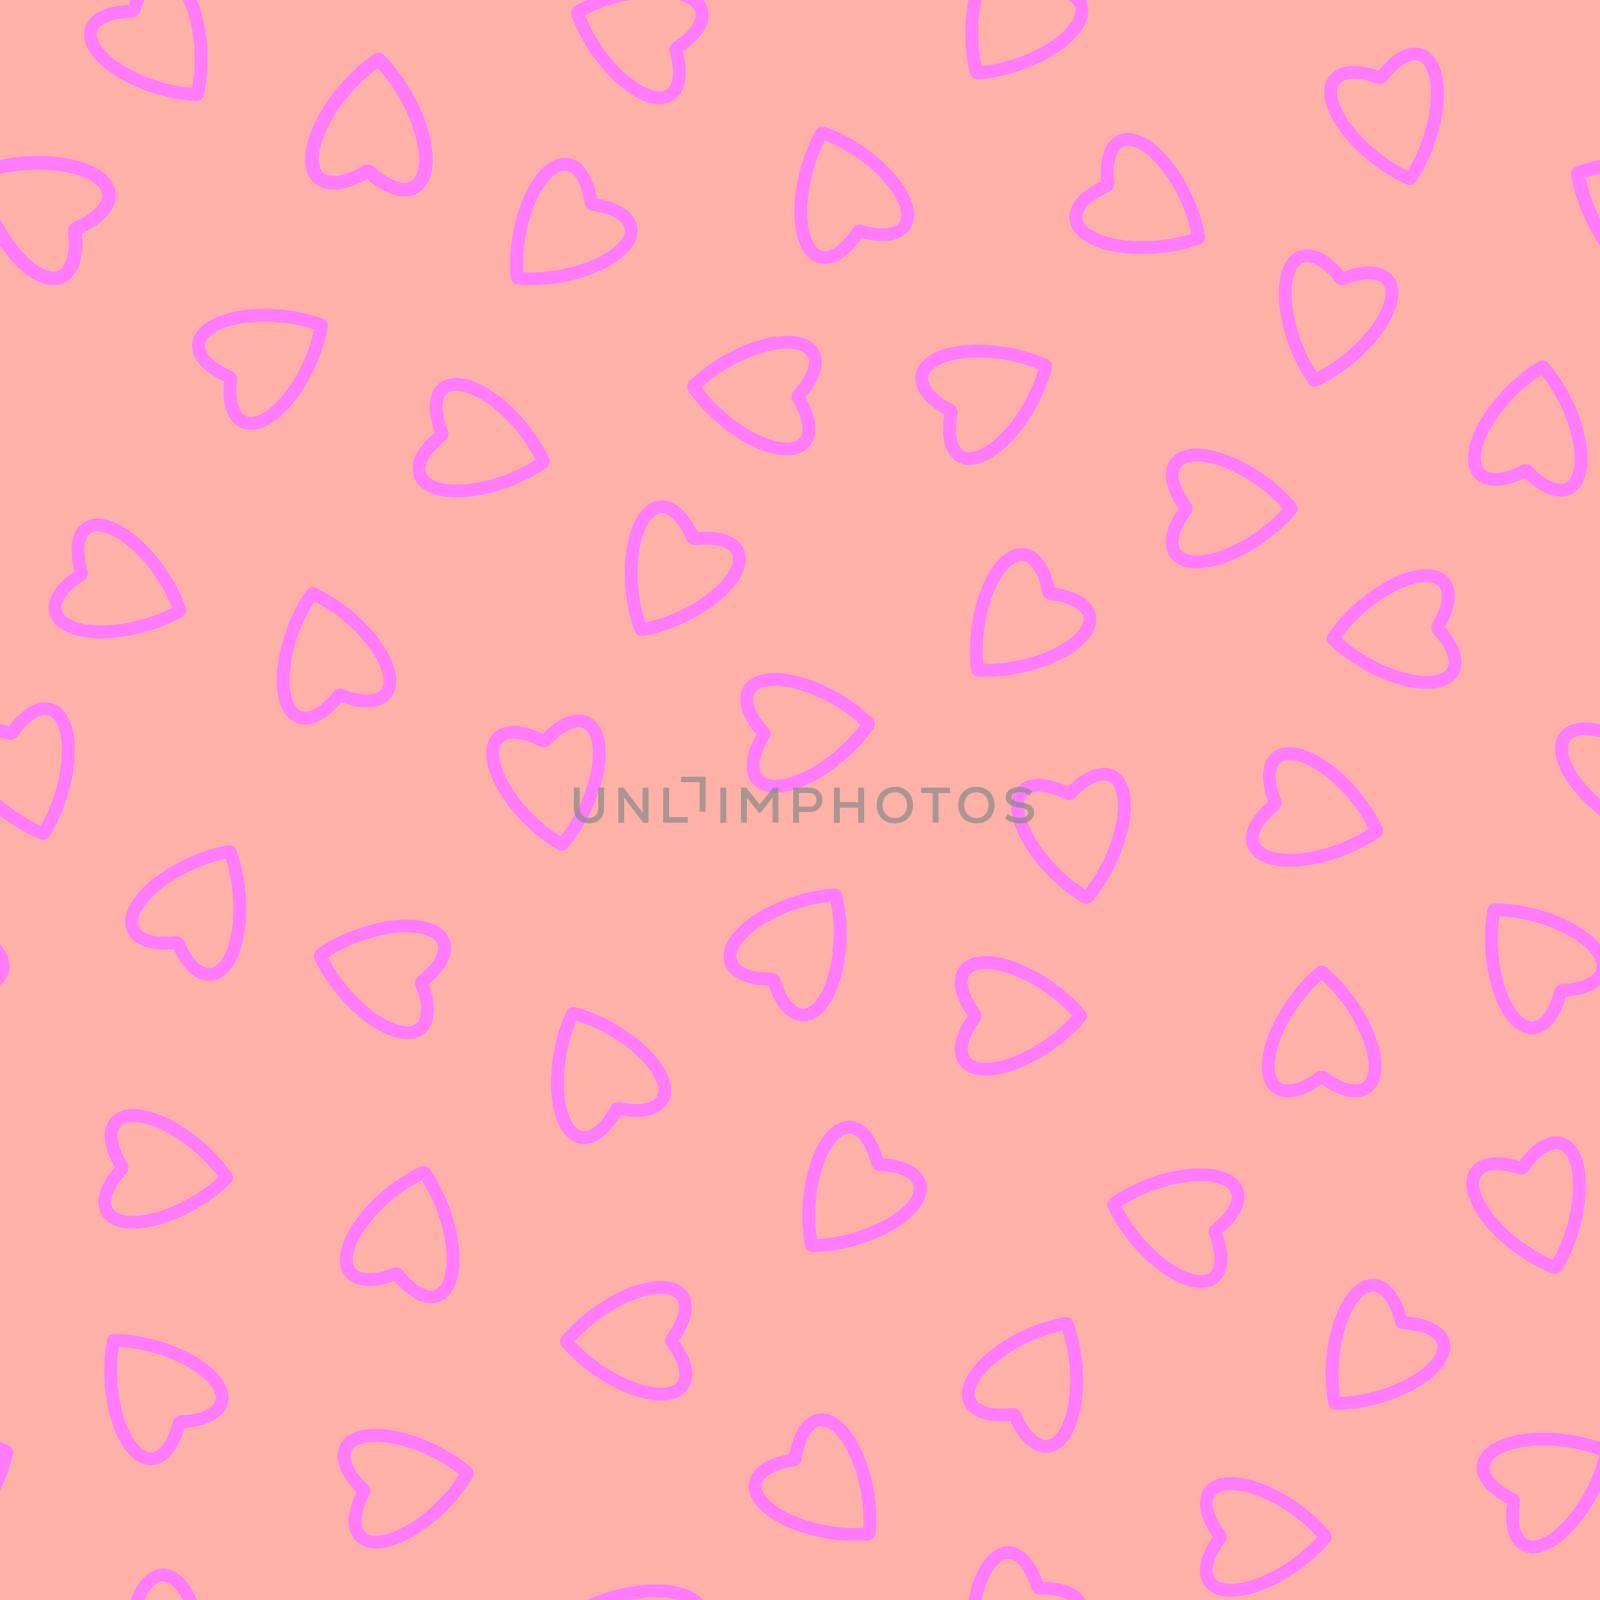 Simple hearts seamless pattern,endless chaotic texture made of tiny heart silhouettes.Valentines,mothers day background.Great for Easter,wedding,scrapbook,gift wrapping paper,textiles.Lilac on pink.